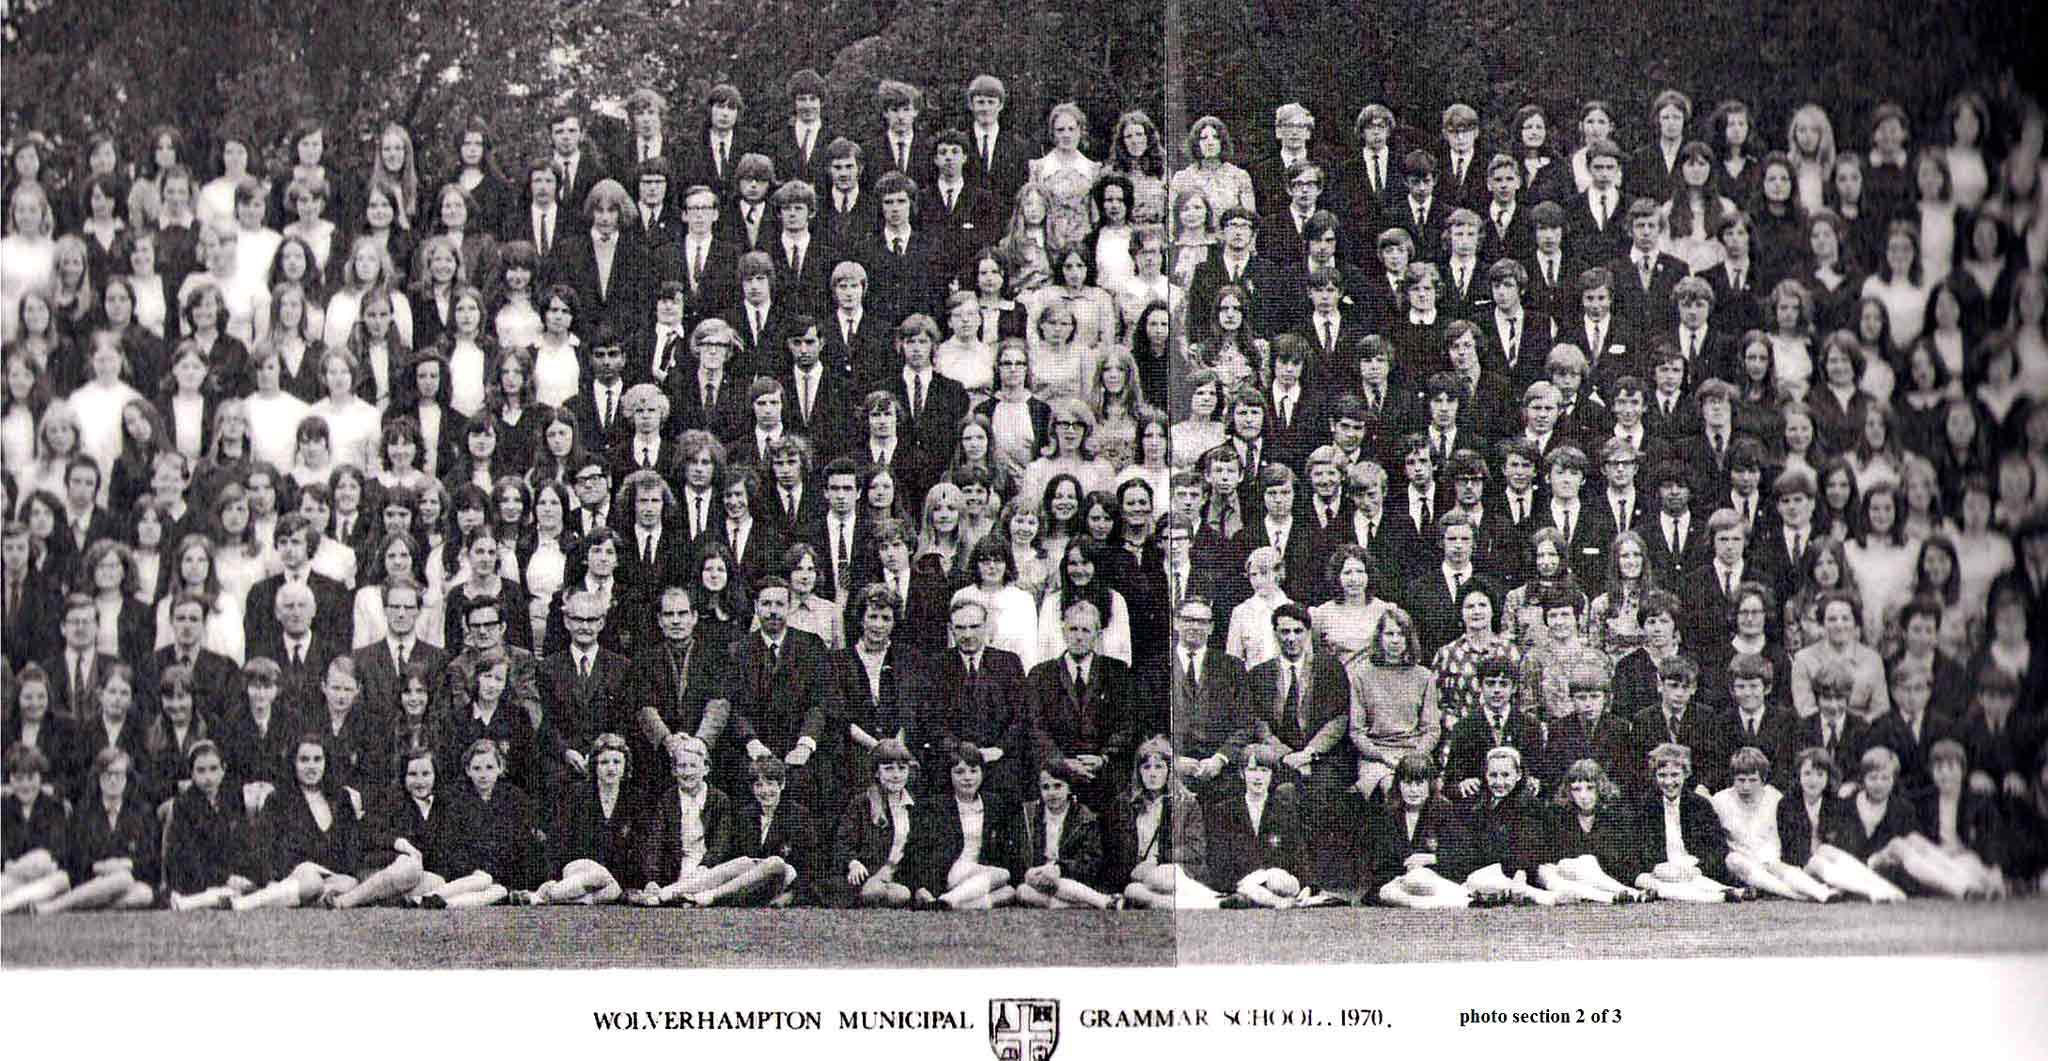 the 1970 Middle of  School Photograph